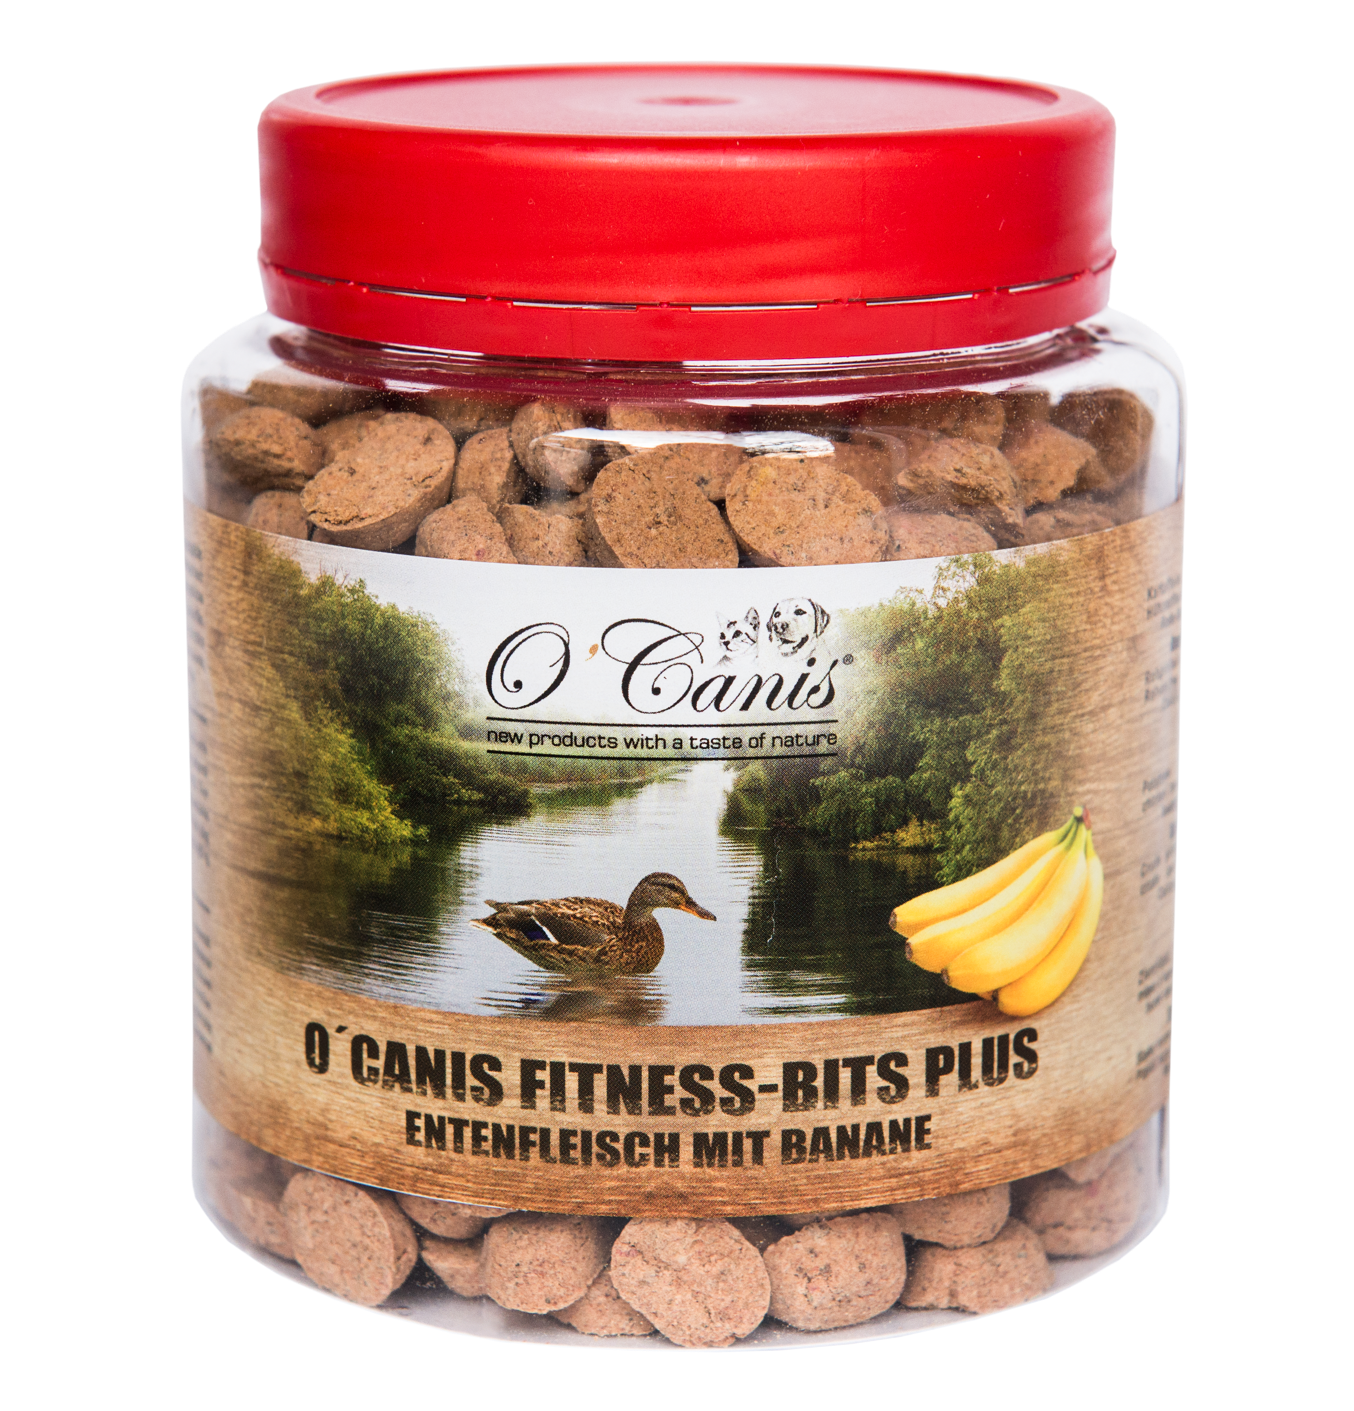 O'Canis - Fitness Bits PLUS "Ente mit Banane" 300g